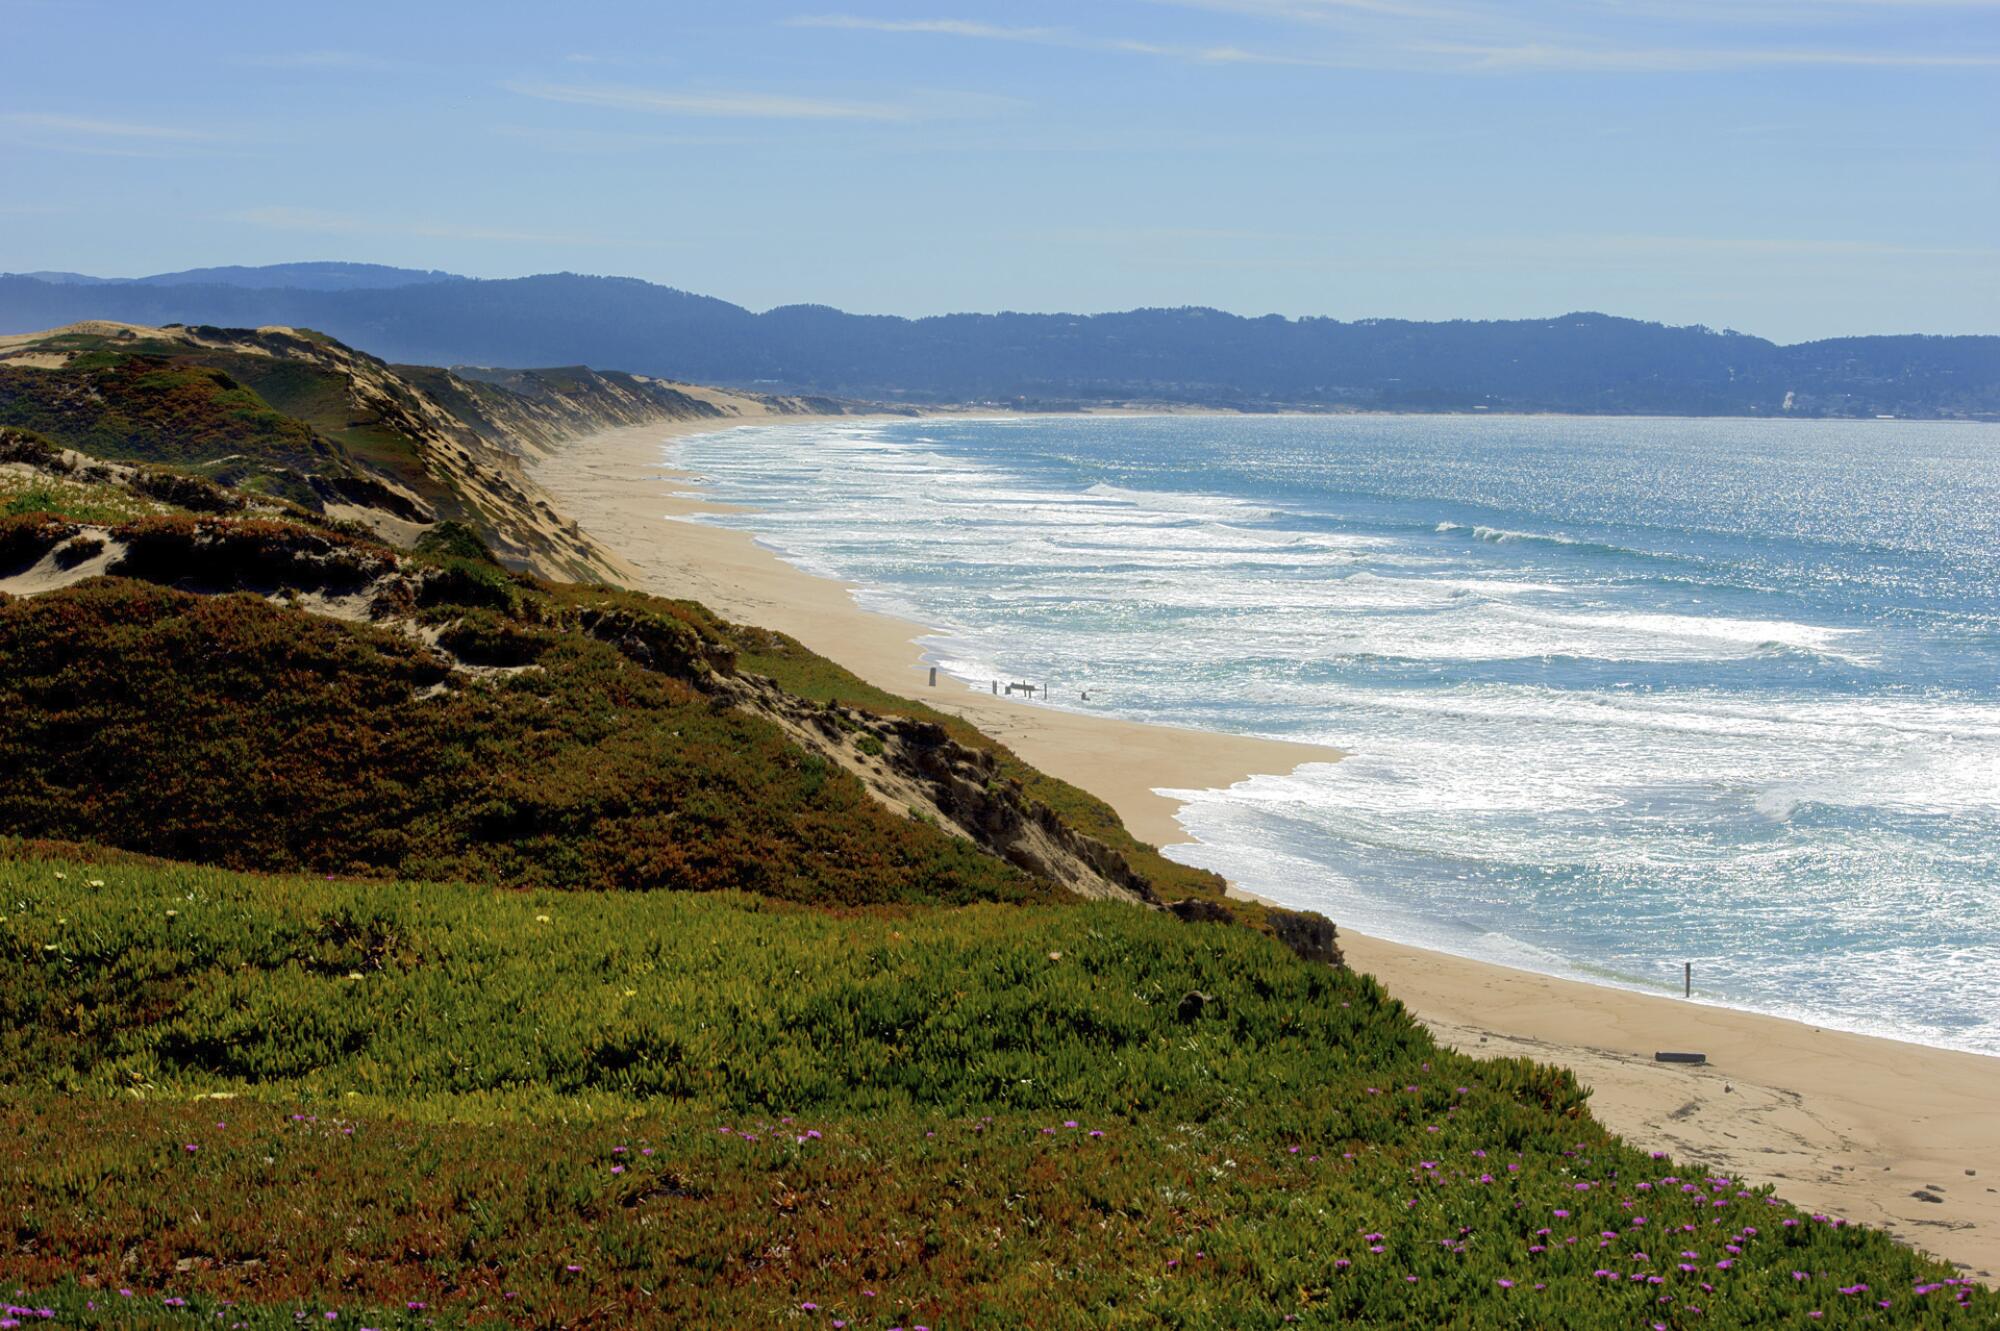 Fort Ord Dunes State Park in Sand City near Monterey.